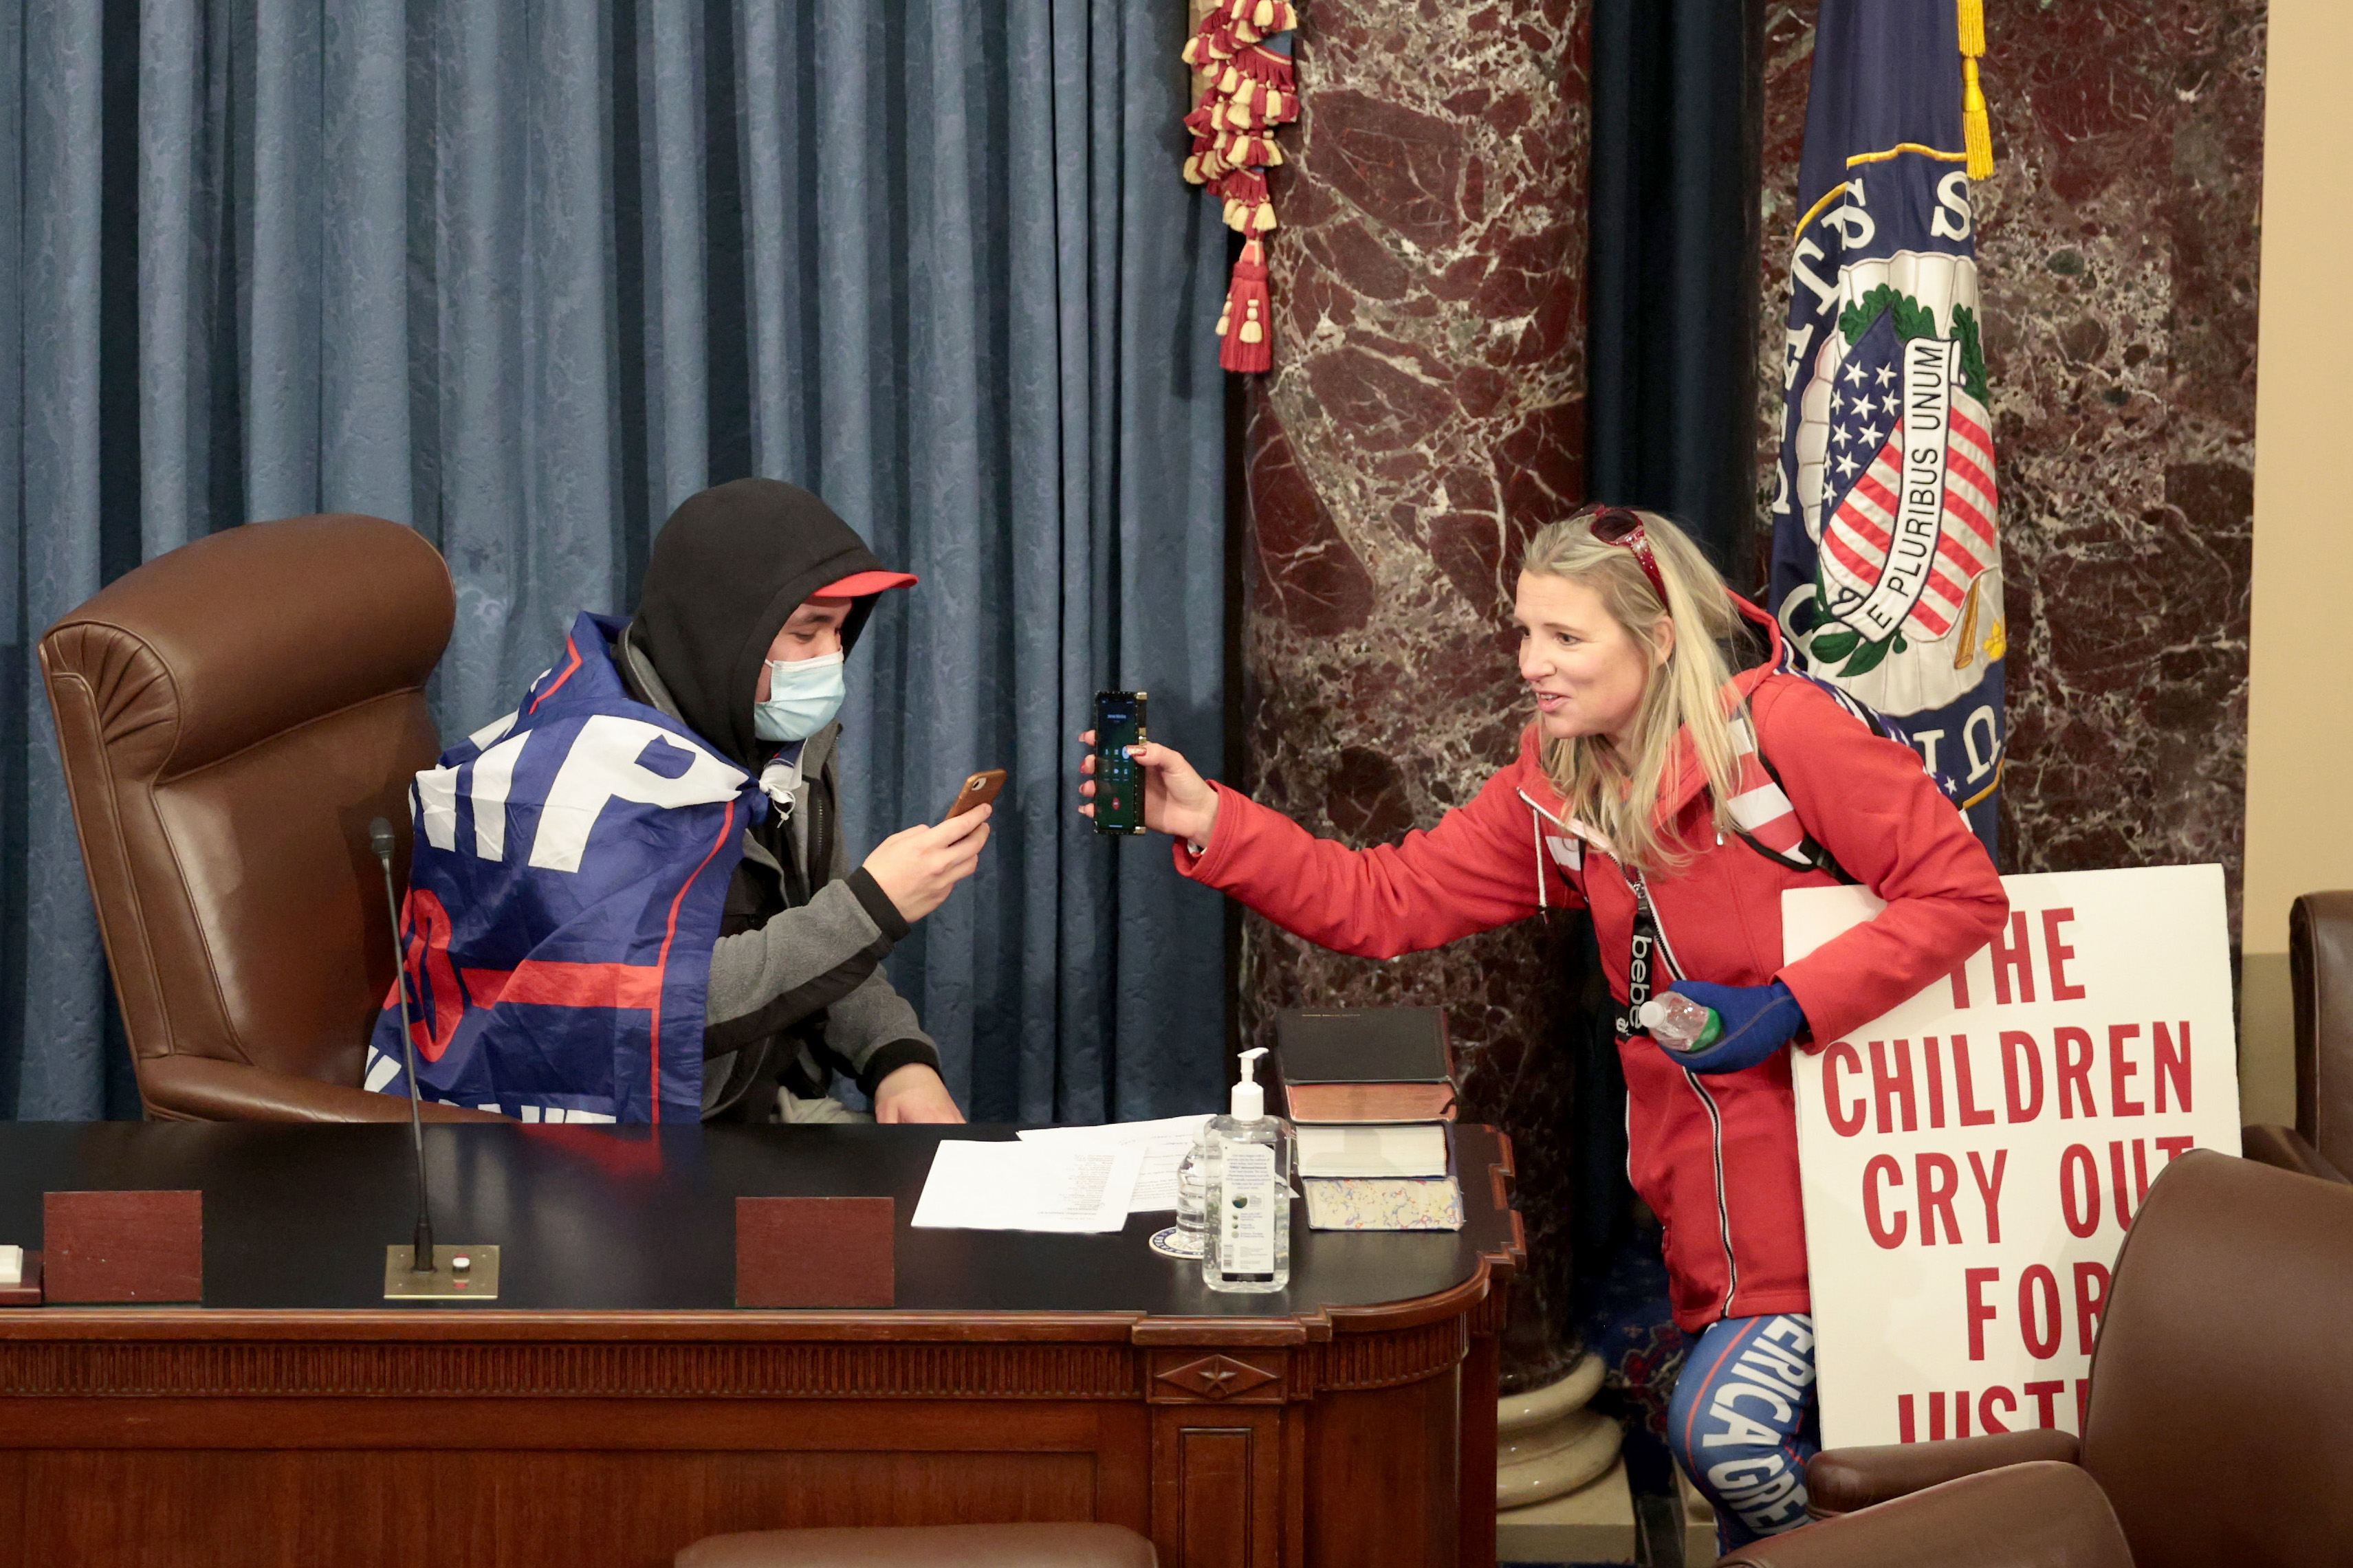 Christine Priola, Capitol Rioter, seen at Mike Pence’s desk, leaves school at QAnon Rant